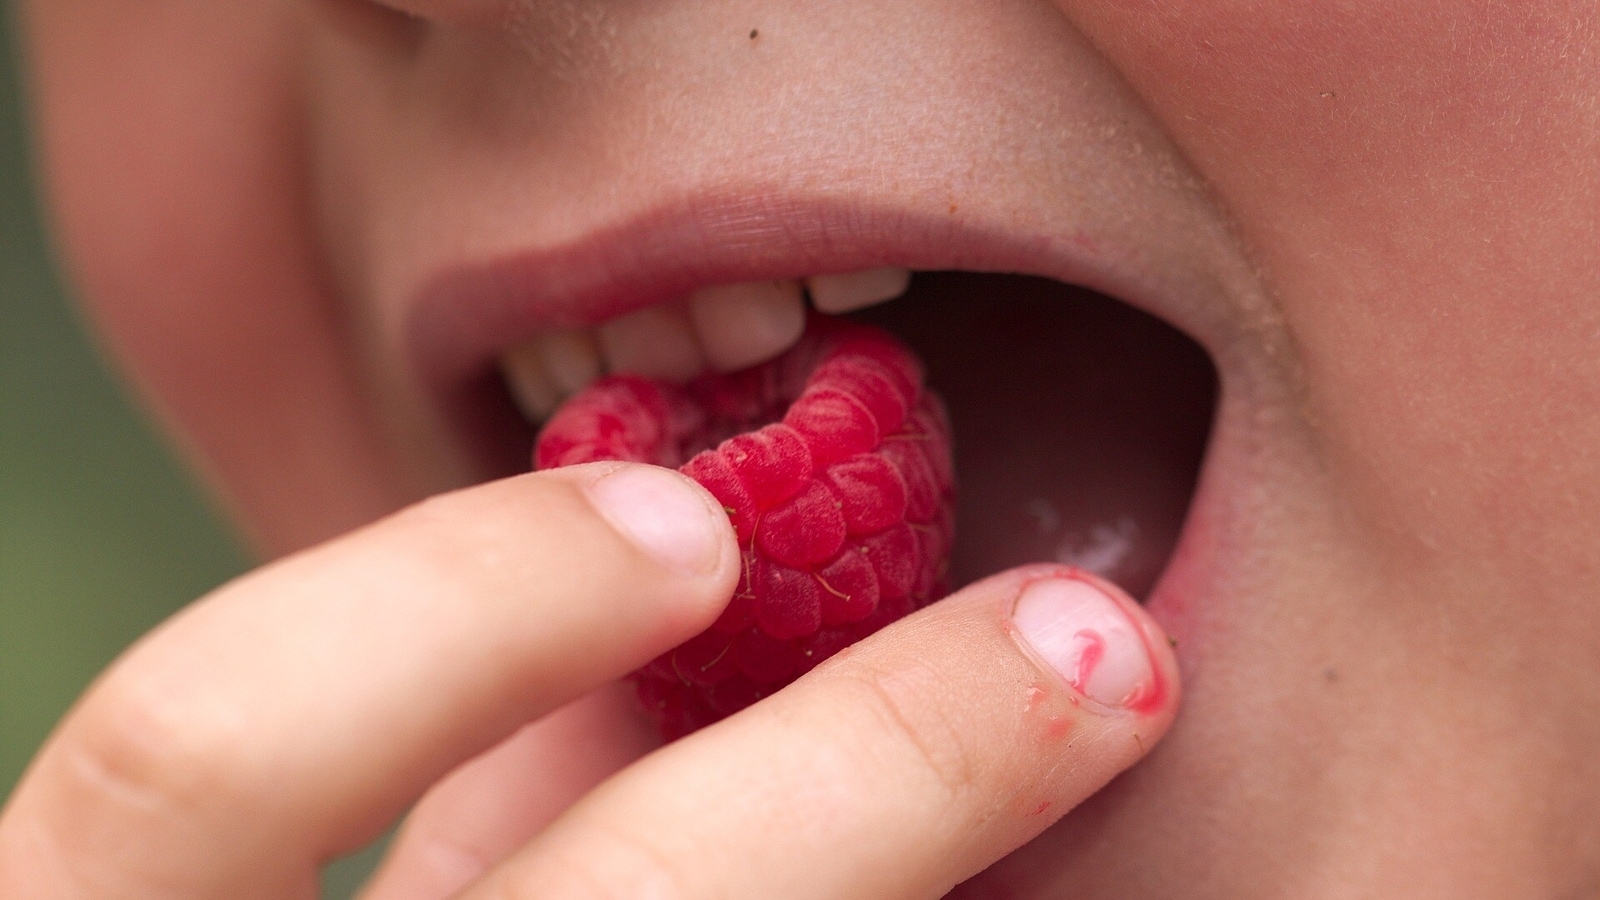 Oral health tips: Eat these 8 food items to keep your teeth clean and healthy | Health